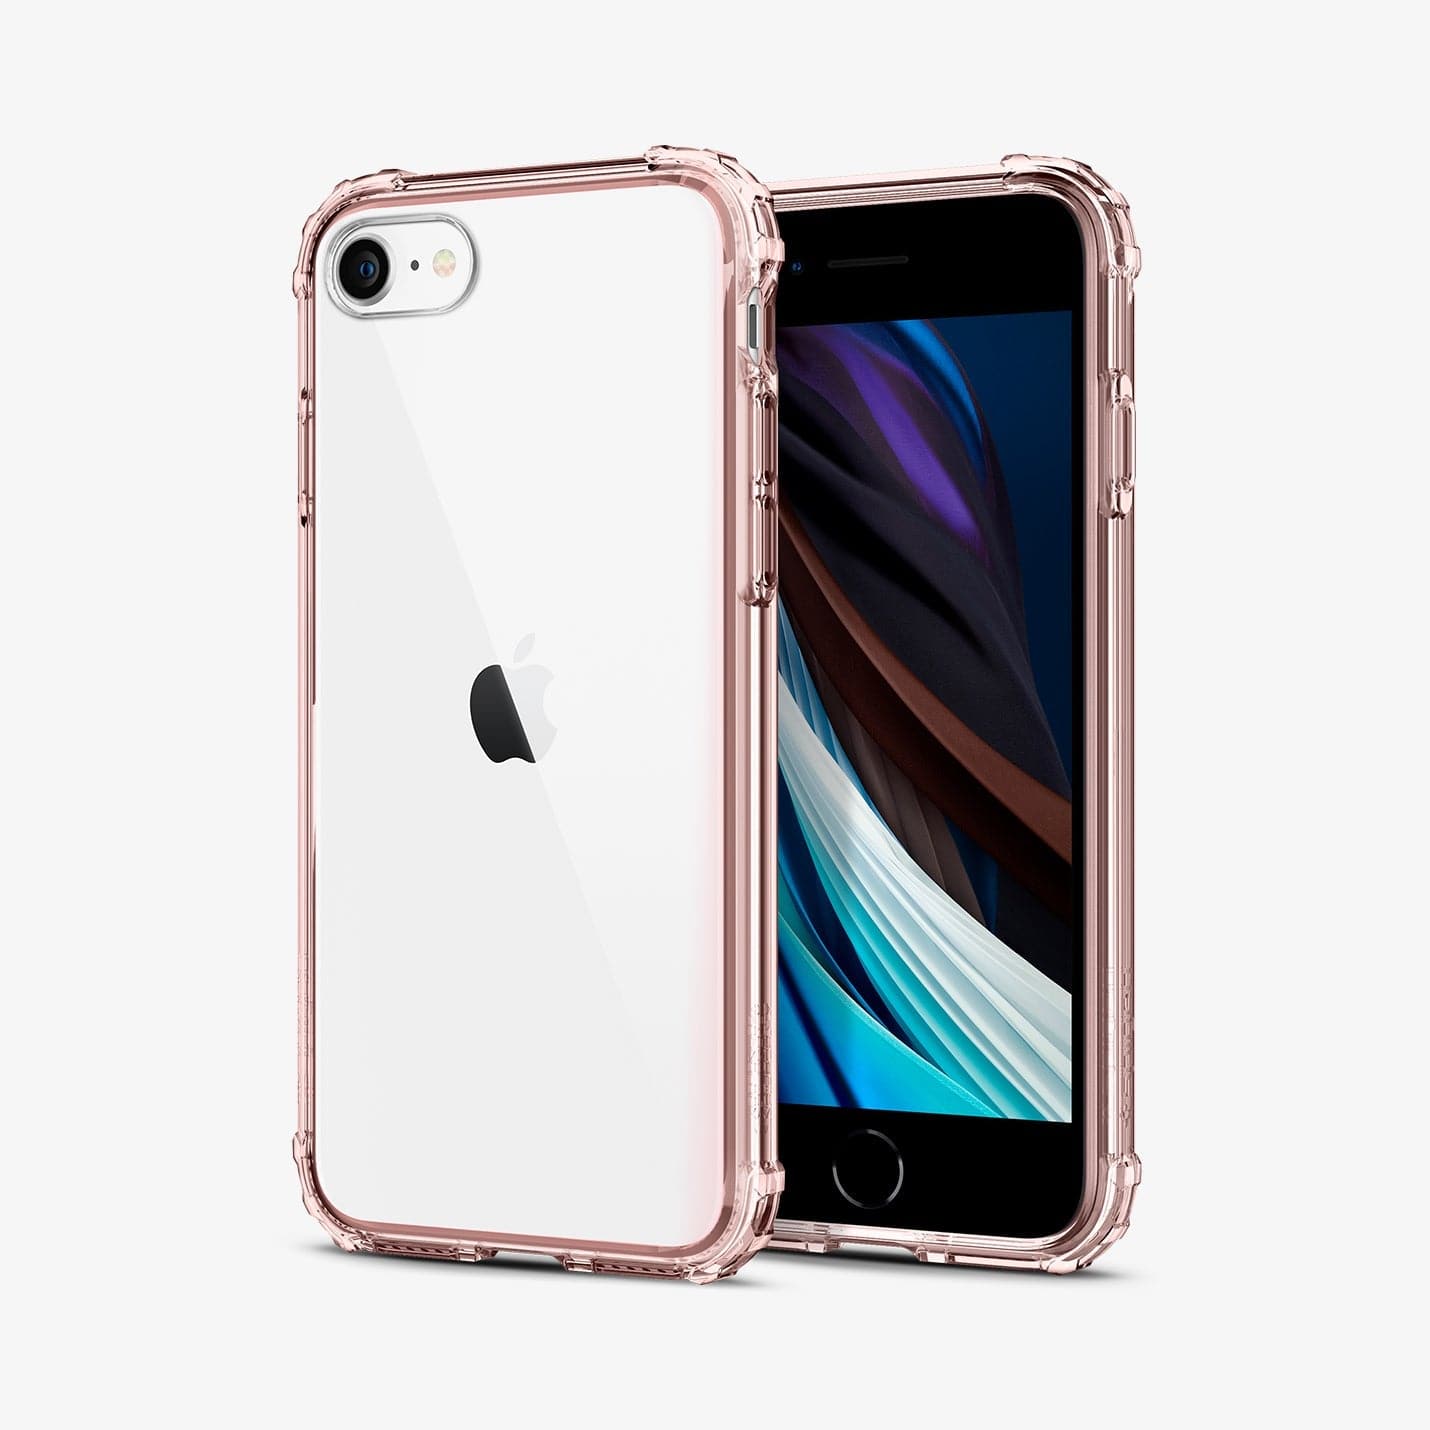 042CS20308 - iPhone 8 Case Crystal Shell in rose crystal showing the back and front